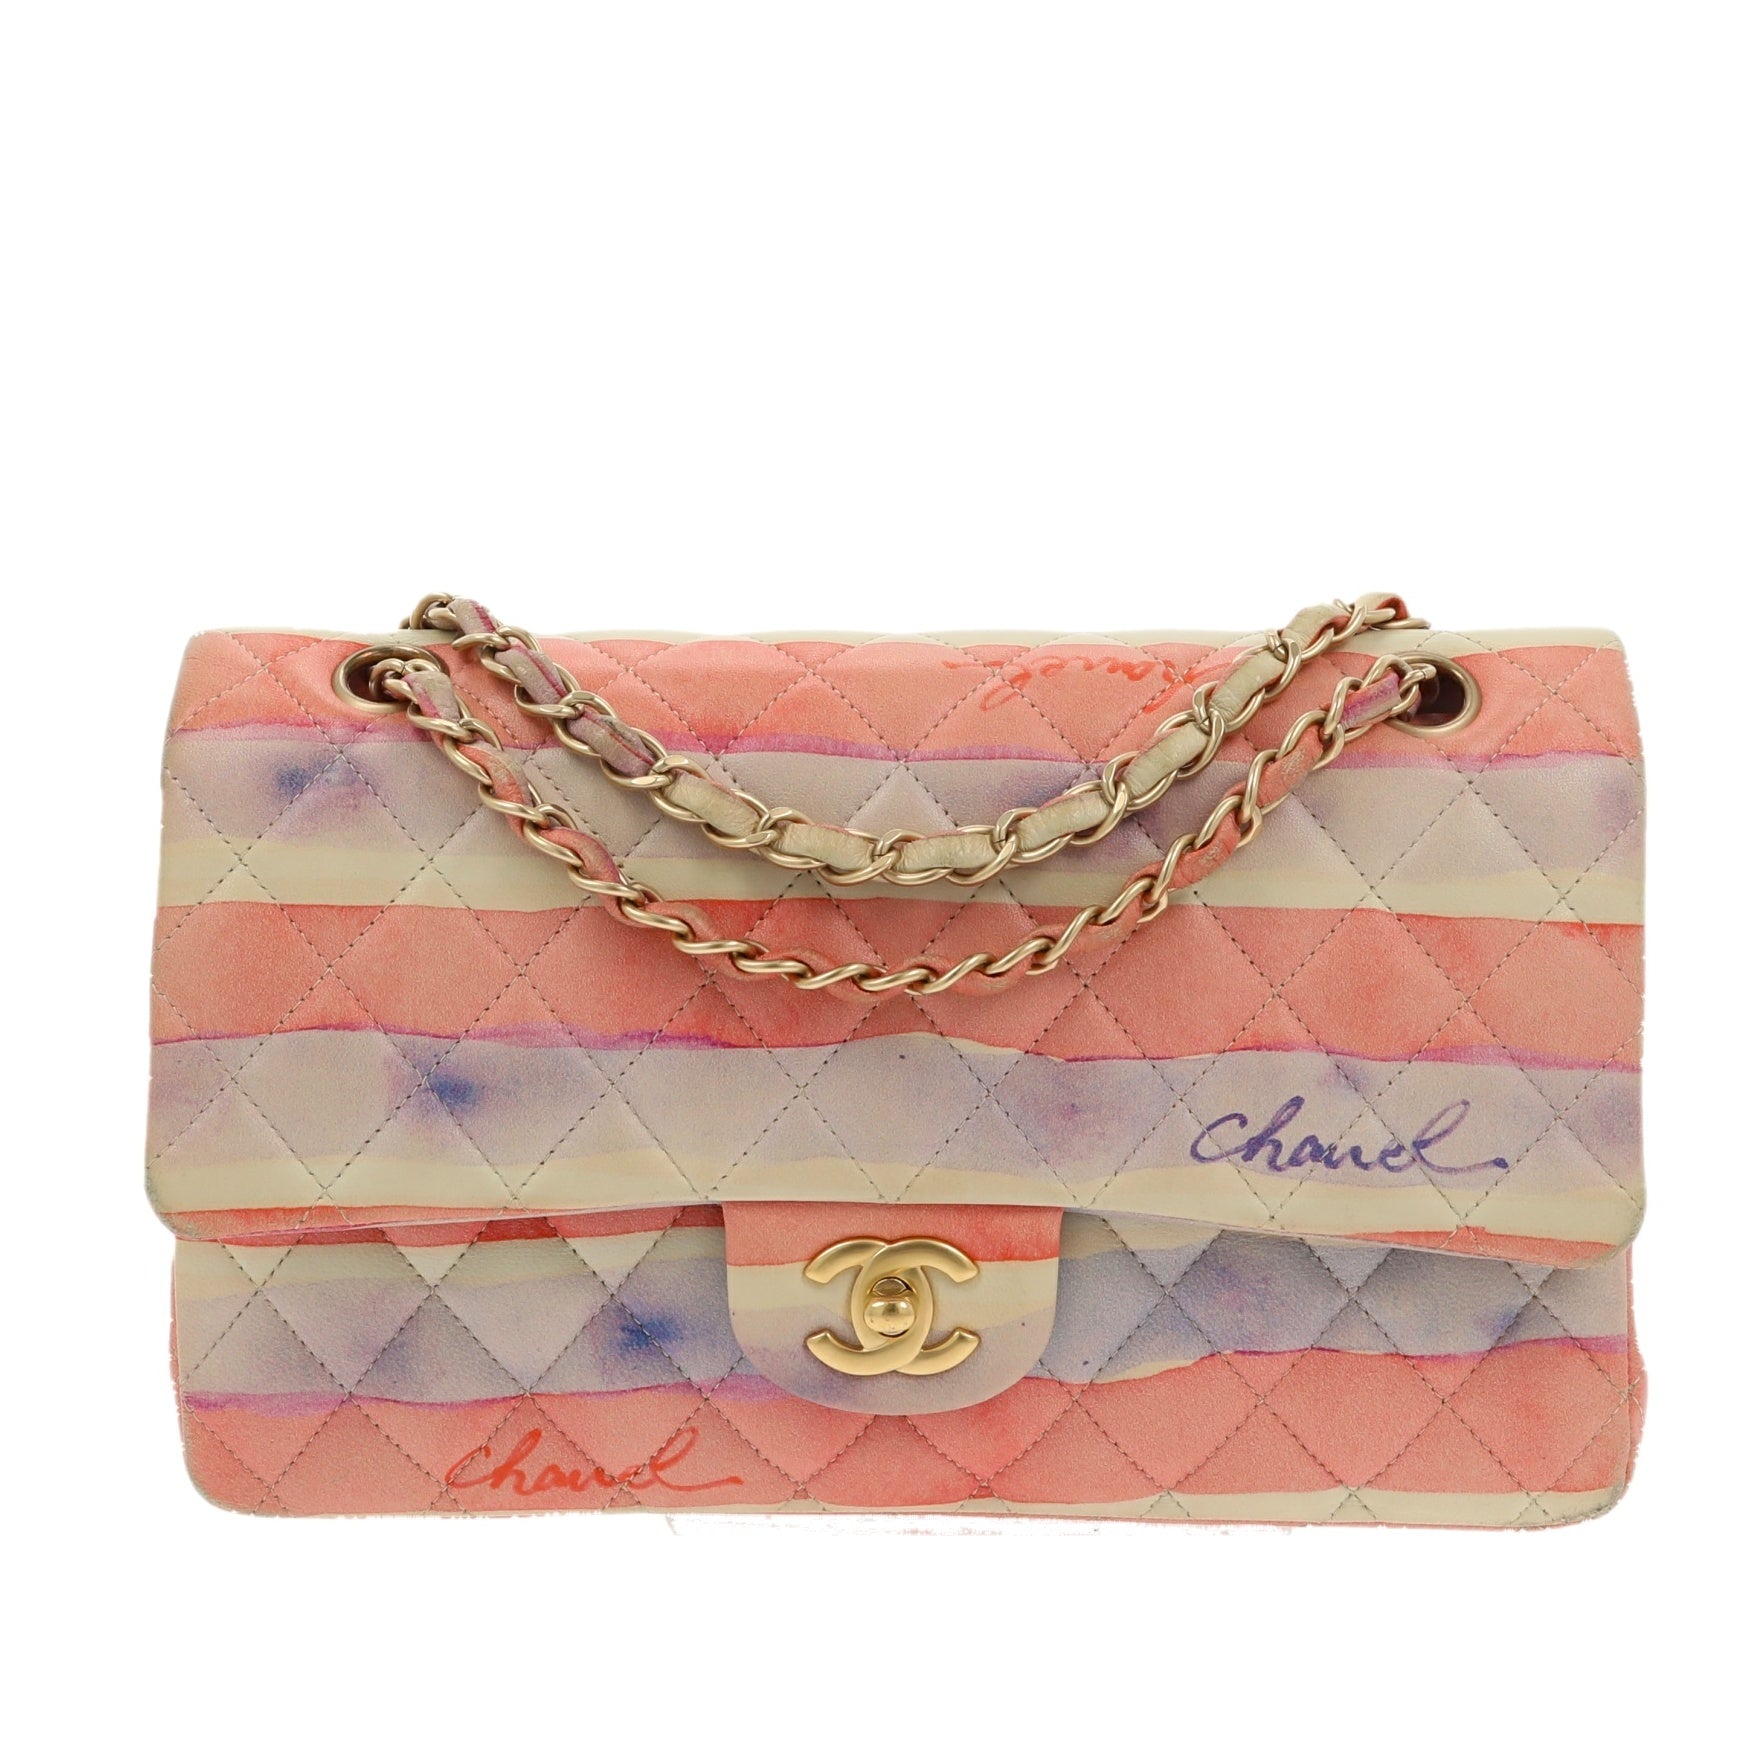 Timeless/classique leather handbag Chanel Multicolour in Leather